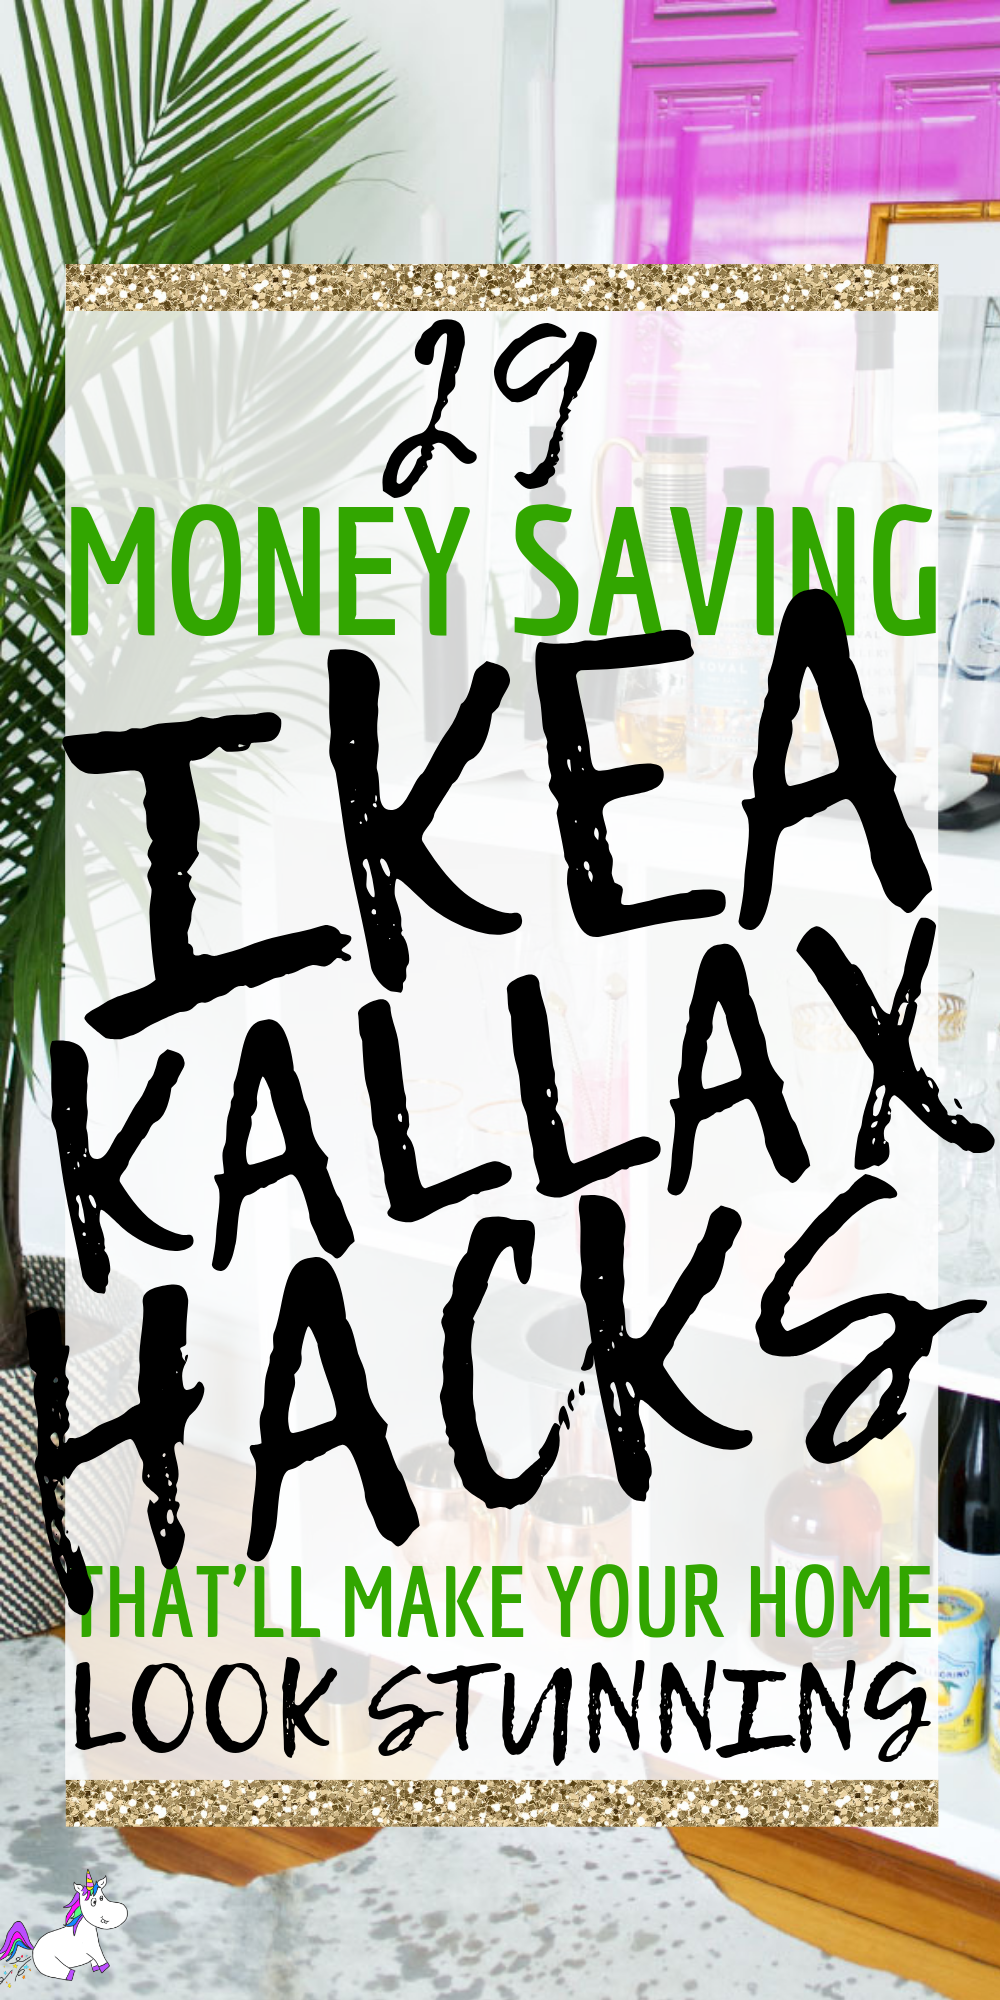 29 Awesome IKEA Kallax hacks for you can DIY on a budget. These kallax hacks are great for your entryway, kitchen, bedroom, Tv stand, coffee bars, dining bench & more Via: https://themummyfront.com #ikeakallax #ikea #kallaxhacks #themummyfront #ikeahacks #creativehomedecor #homedecoronabudget